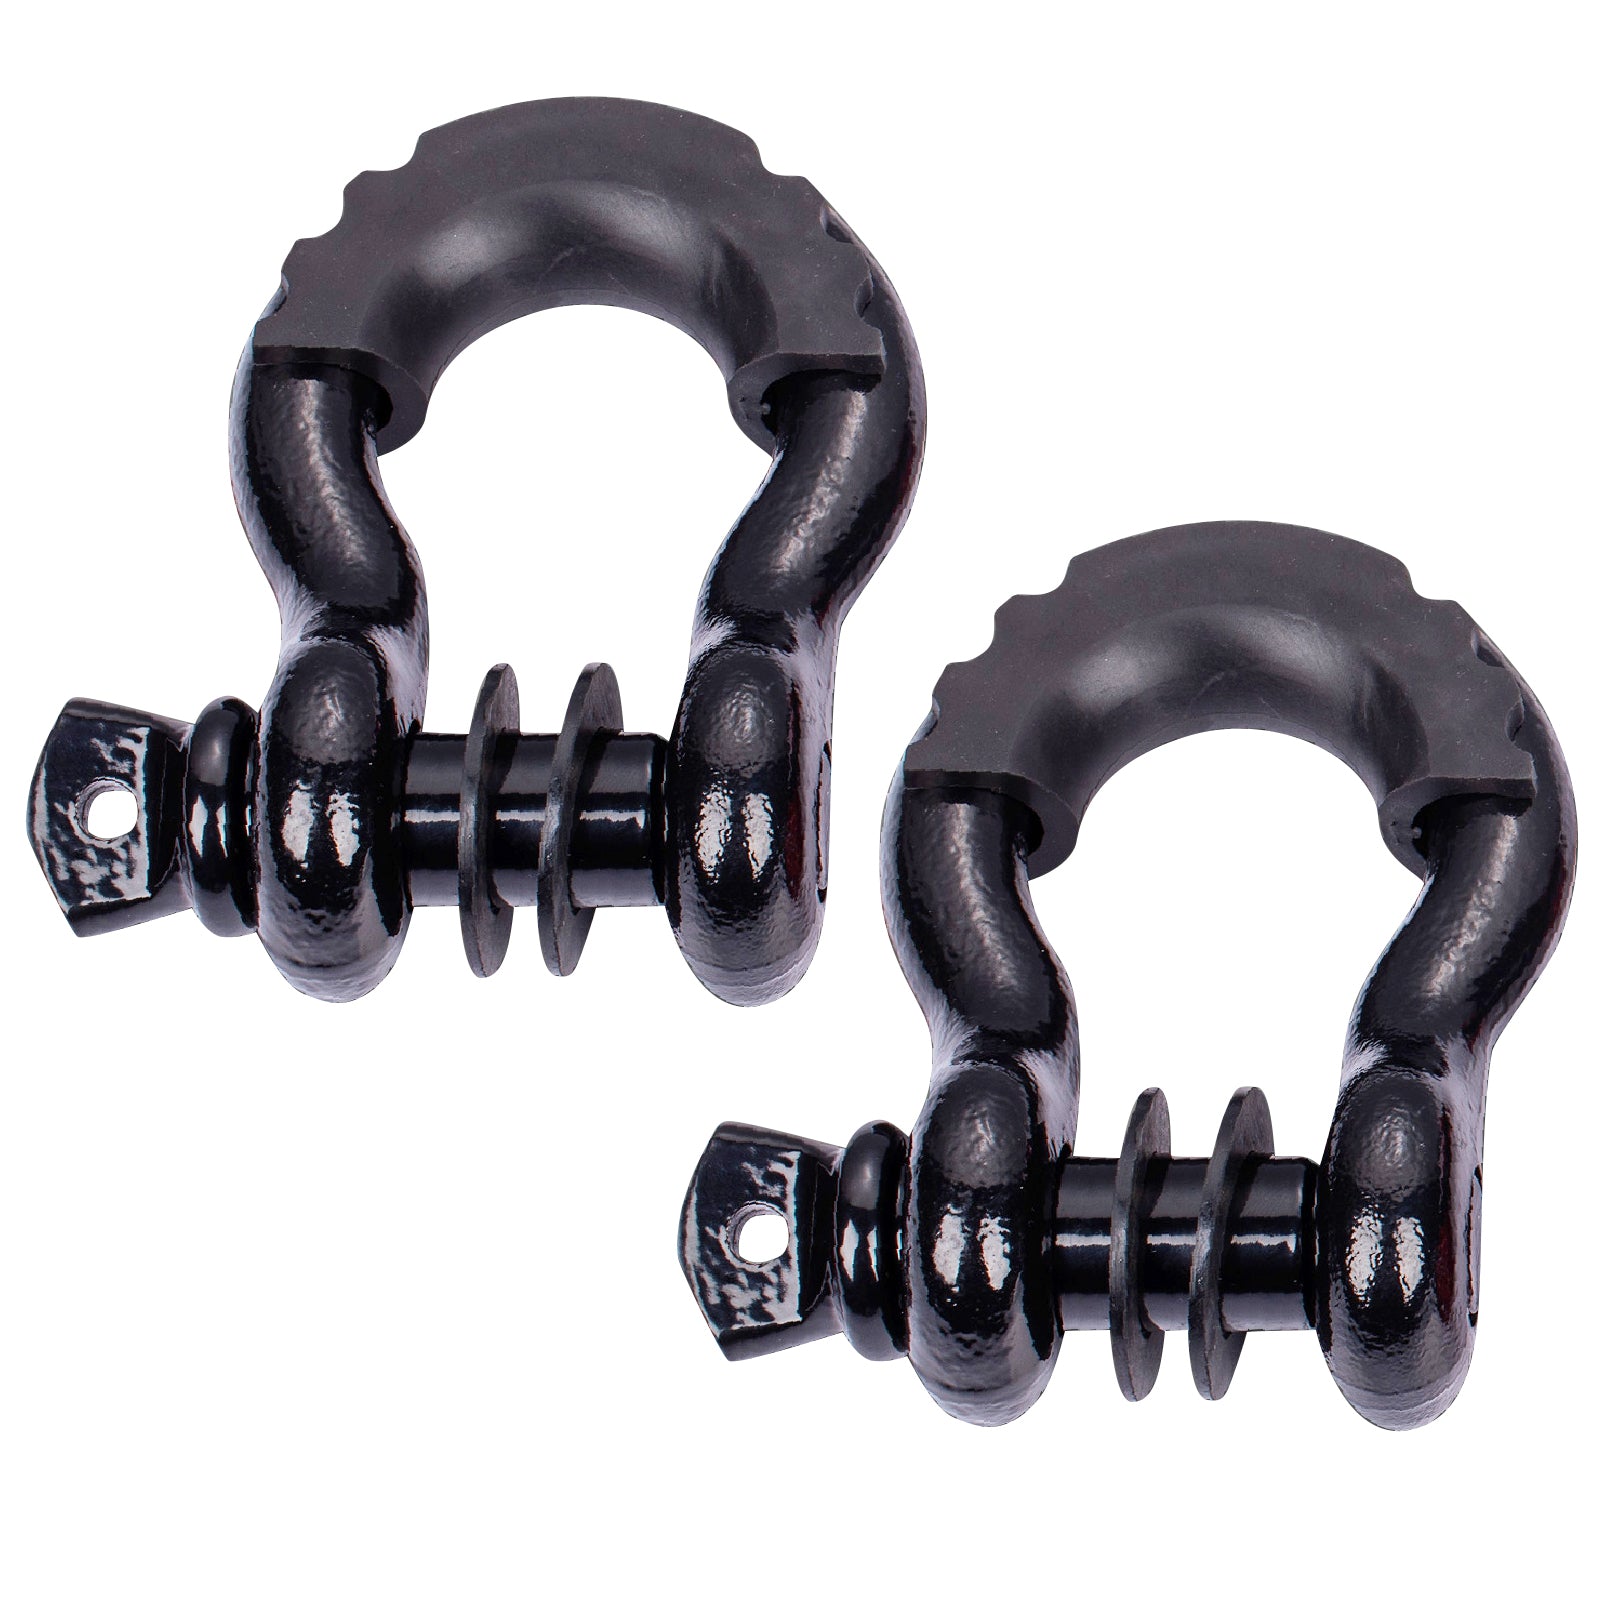 OPENROAD 3/4" D-Ring Shackle 4.75 Ton (9500 Lbs) Capacity with Isolators & Washer Kit for Jeep Truck Vehicle  openroad4wd.com   